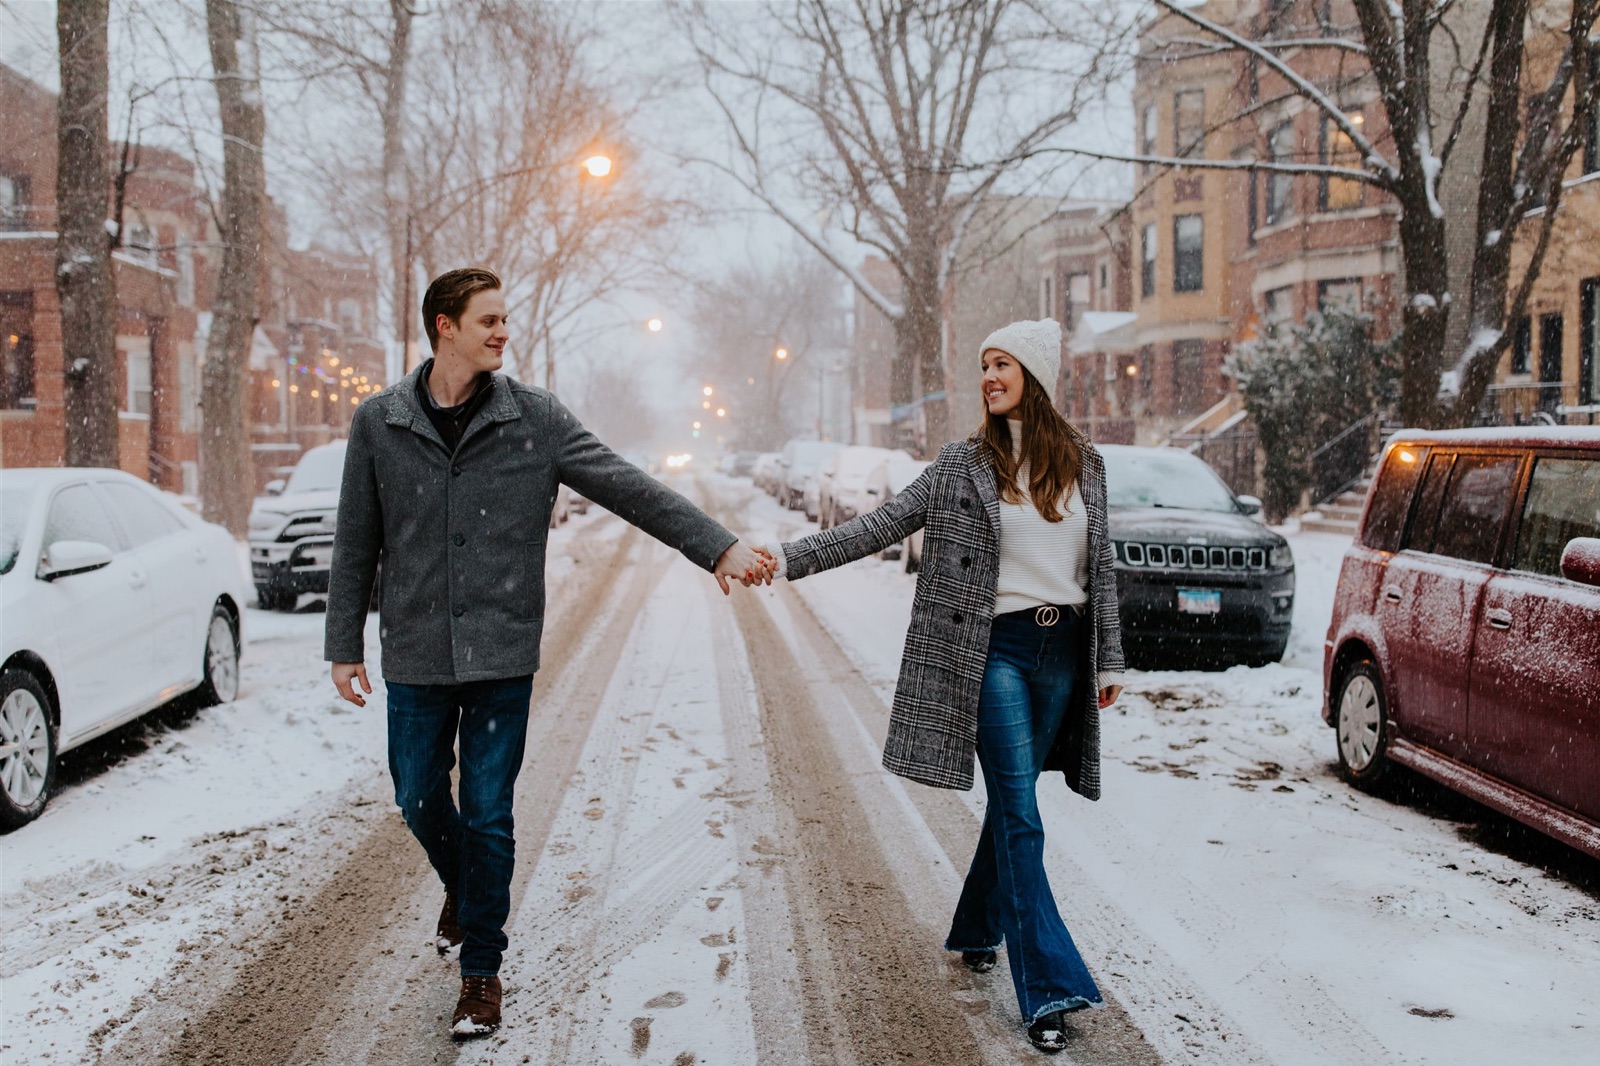 Snowy Chicago Engagement Photos, Snowy Chicago Engagement Session, Chicago Wedding Photographer, Chicago Engagement Photographer, Chicago Engagement Photos, Engagement Photographer in Chicago, Engagement Photos in Chicago, Engagement Photography in Chicago, Winter Chicago Engagement Photos, Snowy Engagement Session